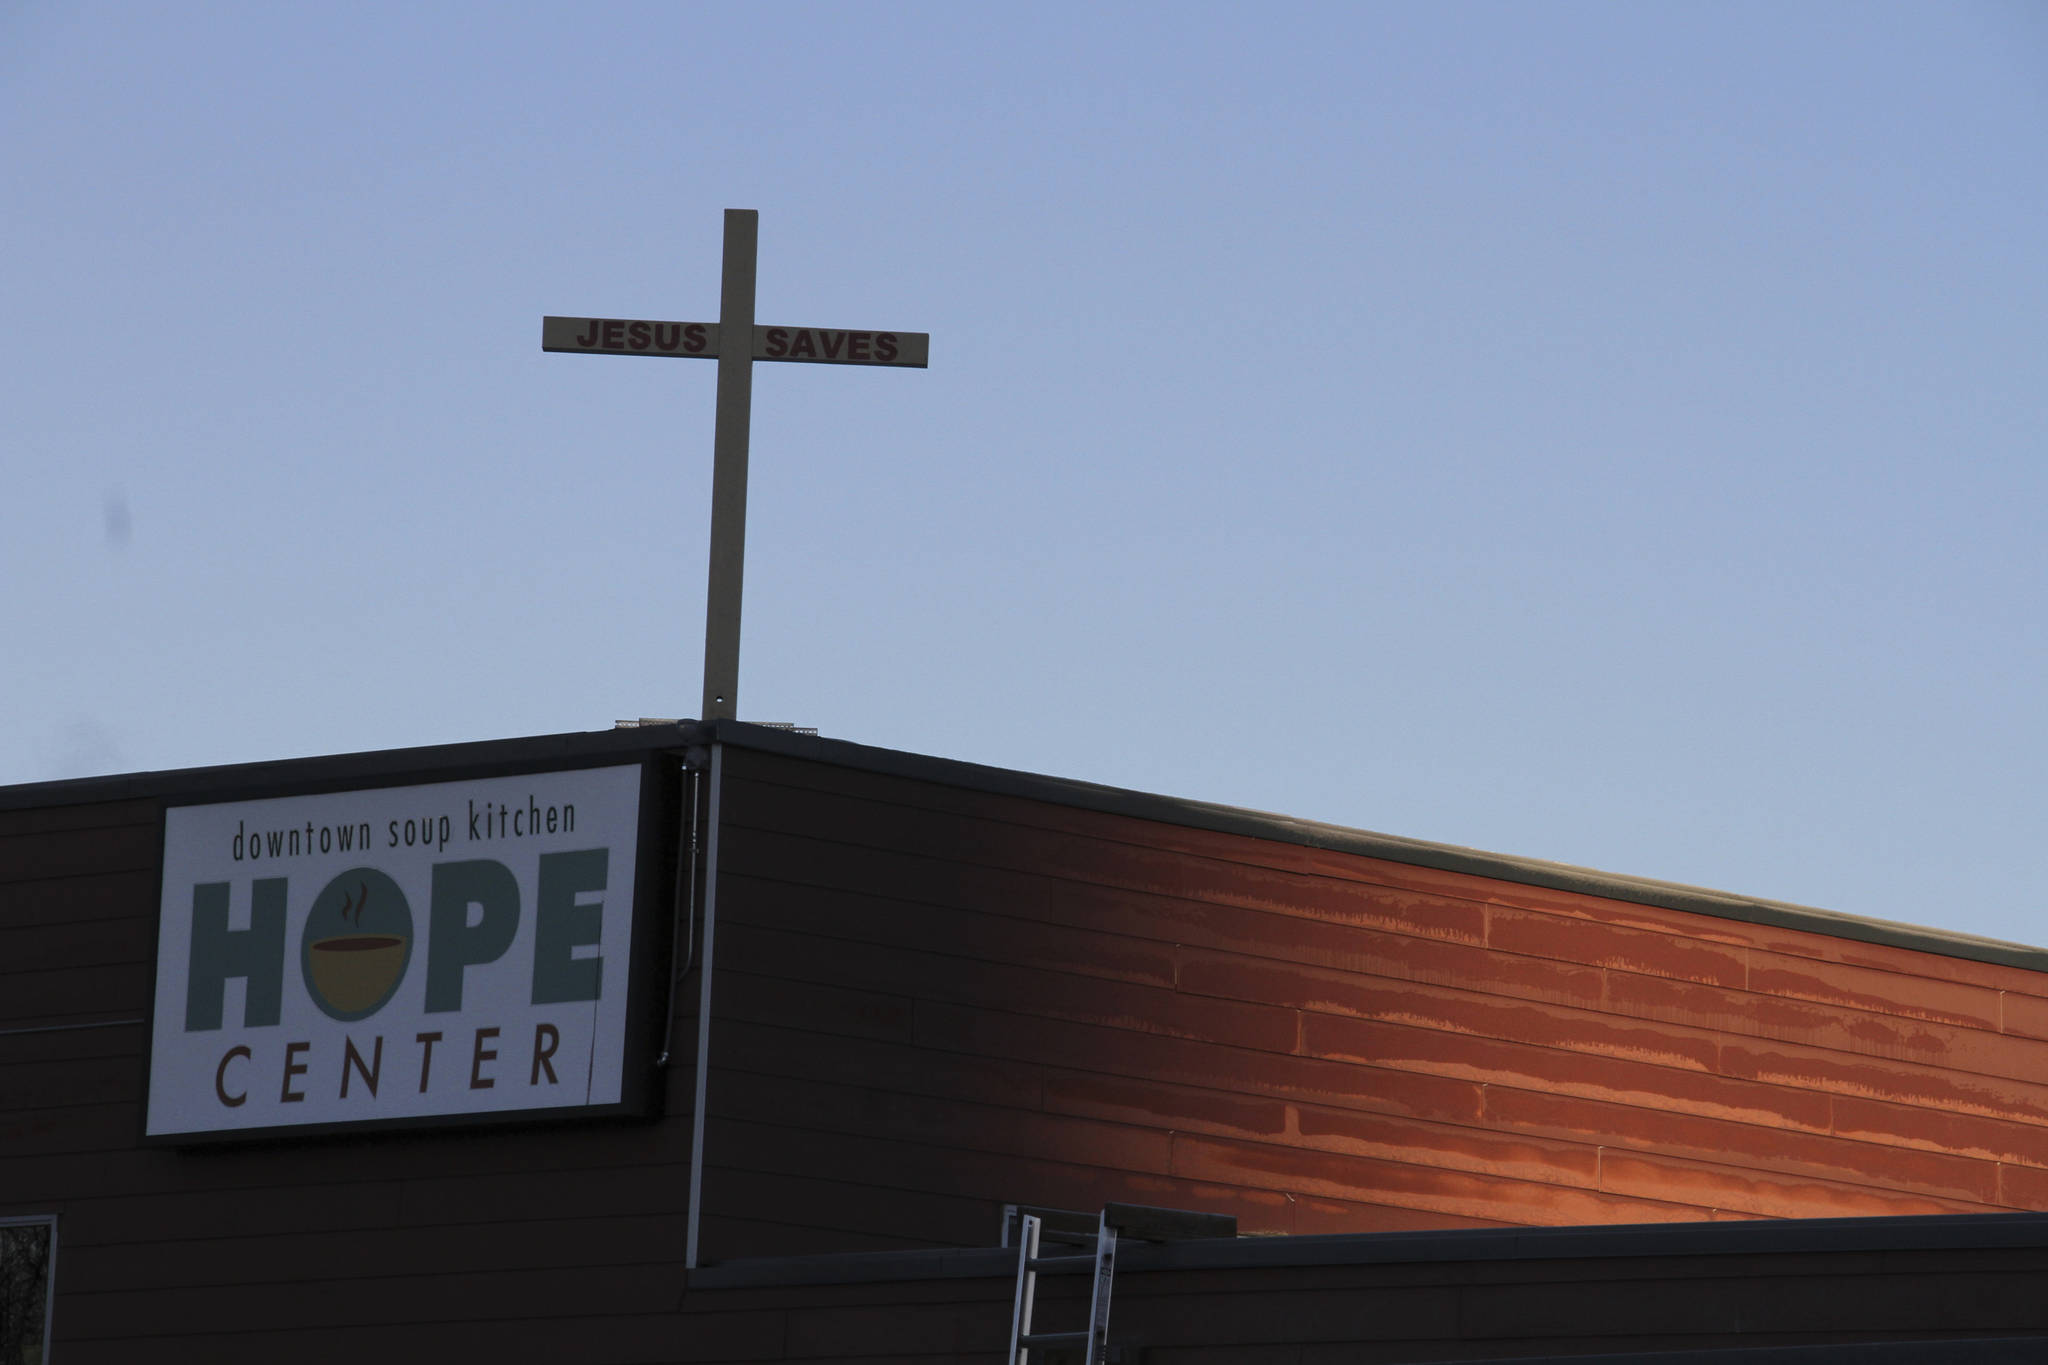 This Nov. 1, 2018, file photo shows the Hope Center women’s shelter in downtown Anchorage, Alaska. A federal judge in Alaska will hear arguments Friday, Jan. 11, 2019, in a lawsuit filed by the faith-based shelter against the city over a requirement that it accept transgender women. Alliance Defending Freedom, a conservative Christian law firm, is seeking a preliminary injunction to stop the city from applying its gender identity law to the Hope Center shelter. (Mark Thiessen | Associated Press File)